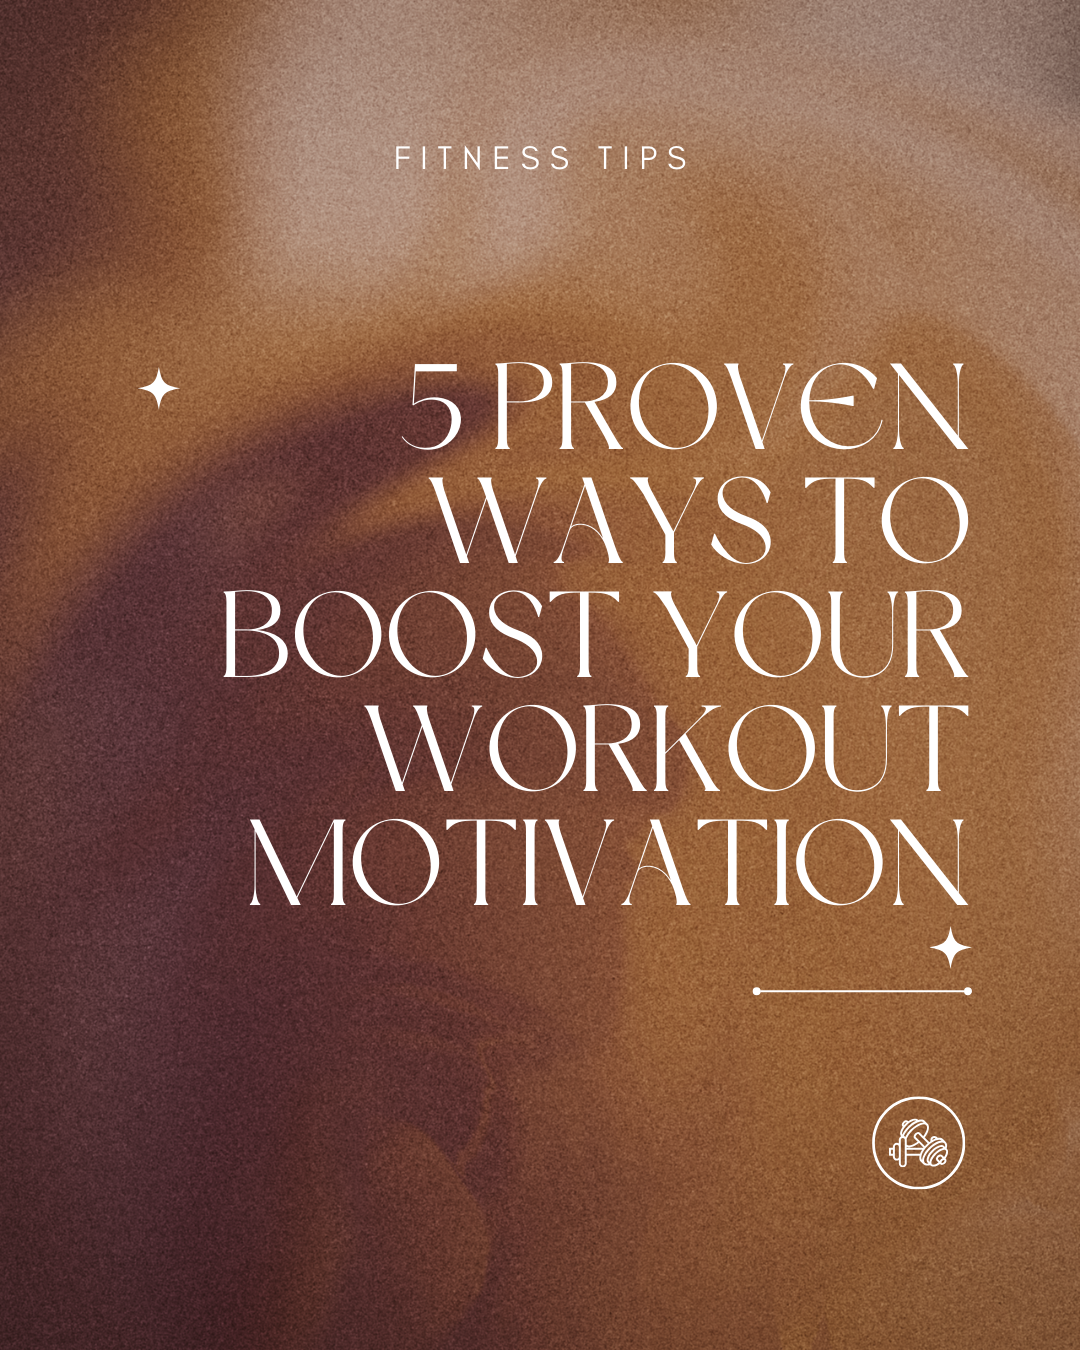 5 Proven Ways to Boost Your Workout Motivation